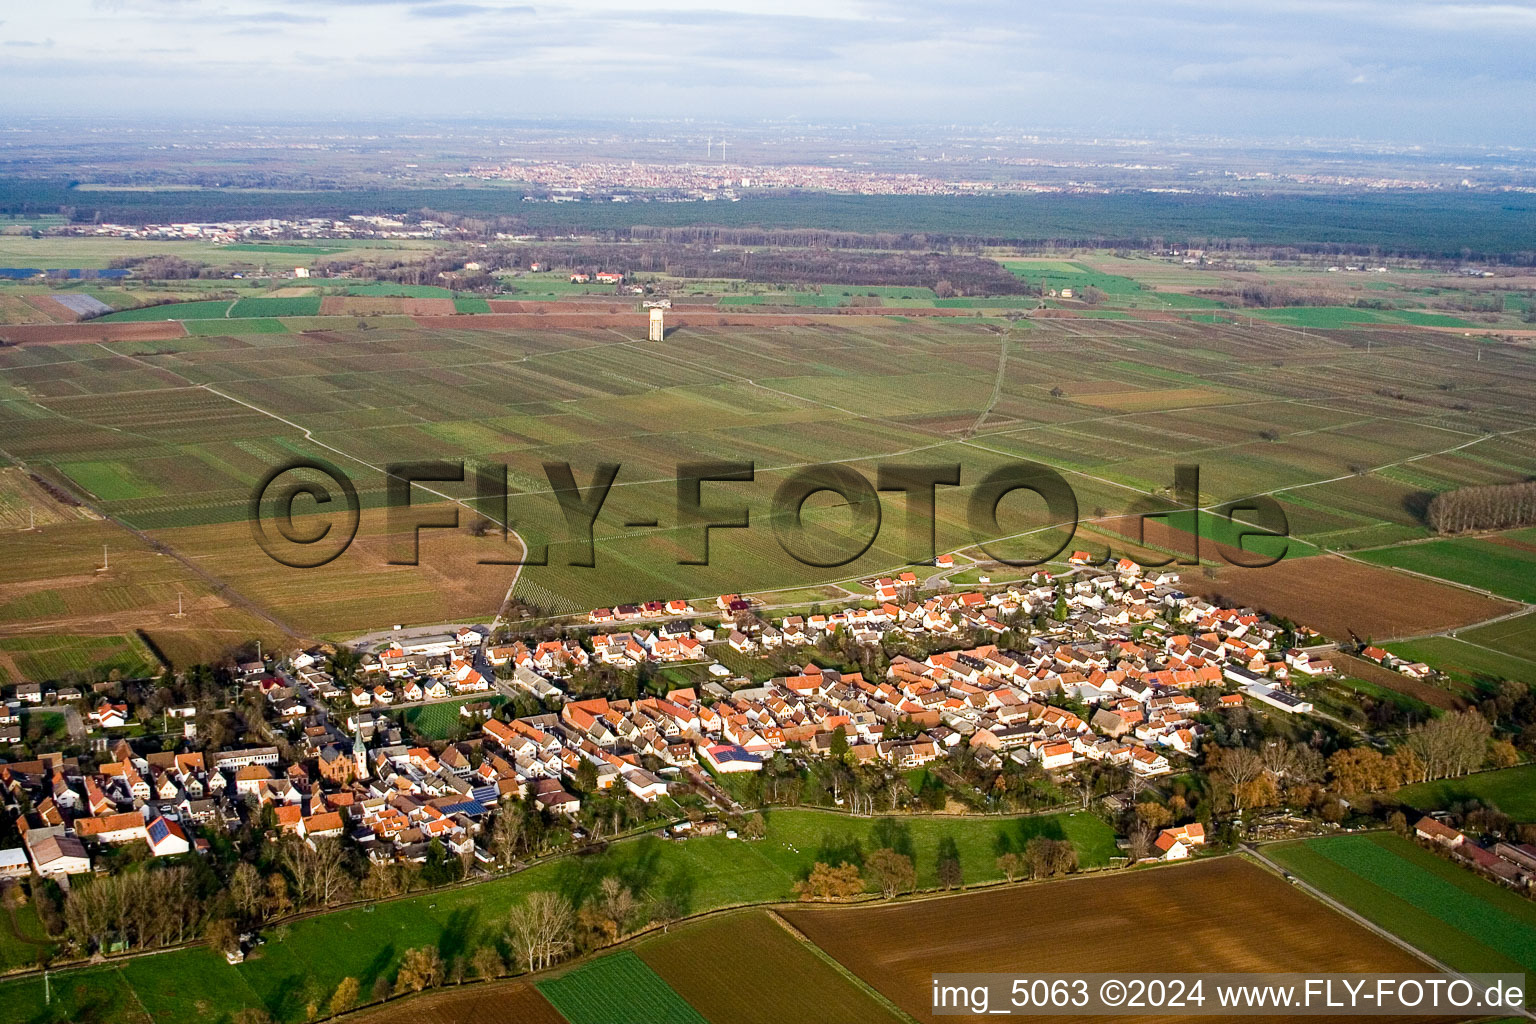 Oblique view of Village - view on the edge of agricultural fields and farmland in the district Duttweiler in Neustadt an der Weinstrasse in the state Rhineland-Palatinate